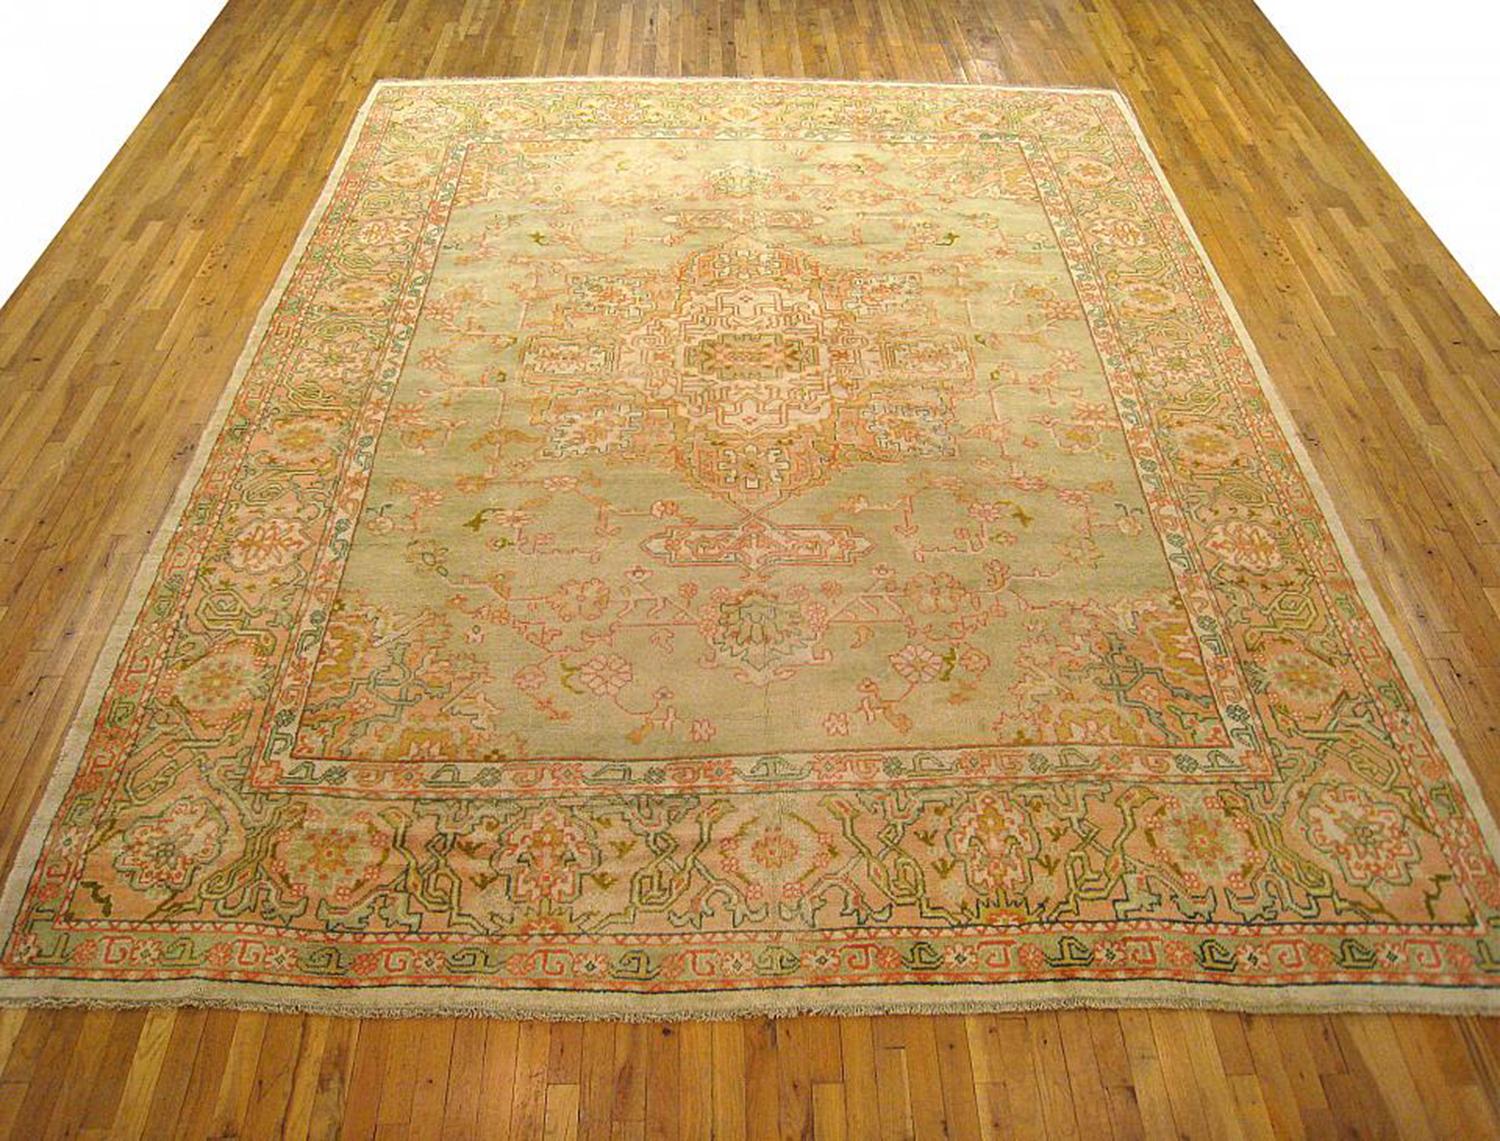 An antique Turkish Oushak oriental carpet, size 13'2 x 10'3, circa 1910. This lovely decorative carpet features a diffuse central medallion on a subtly hued central field, which is encased with a border of stylized floral elements. Hand-knotted,